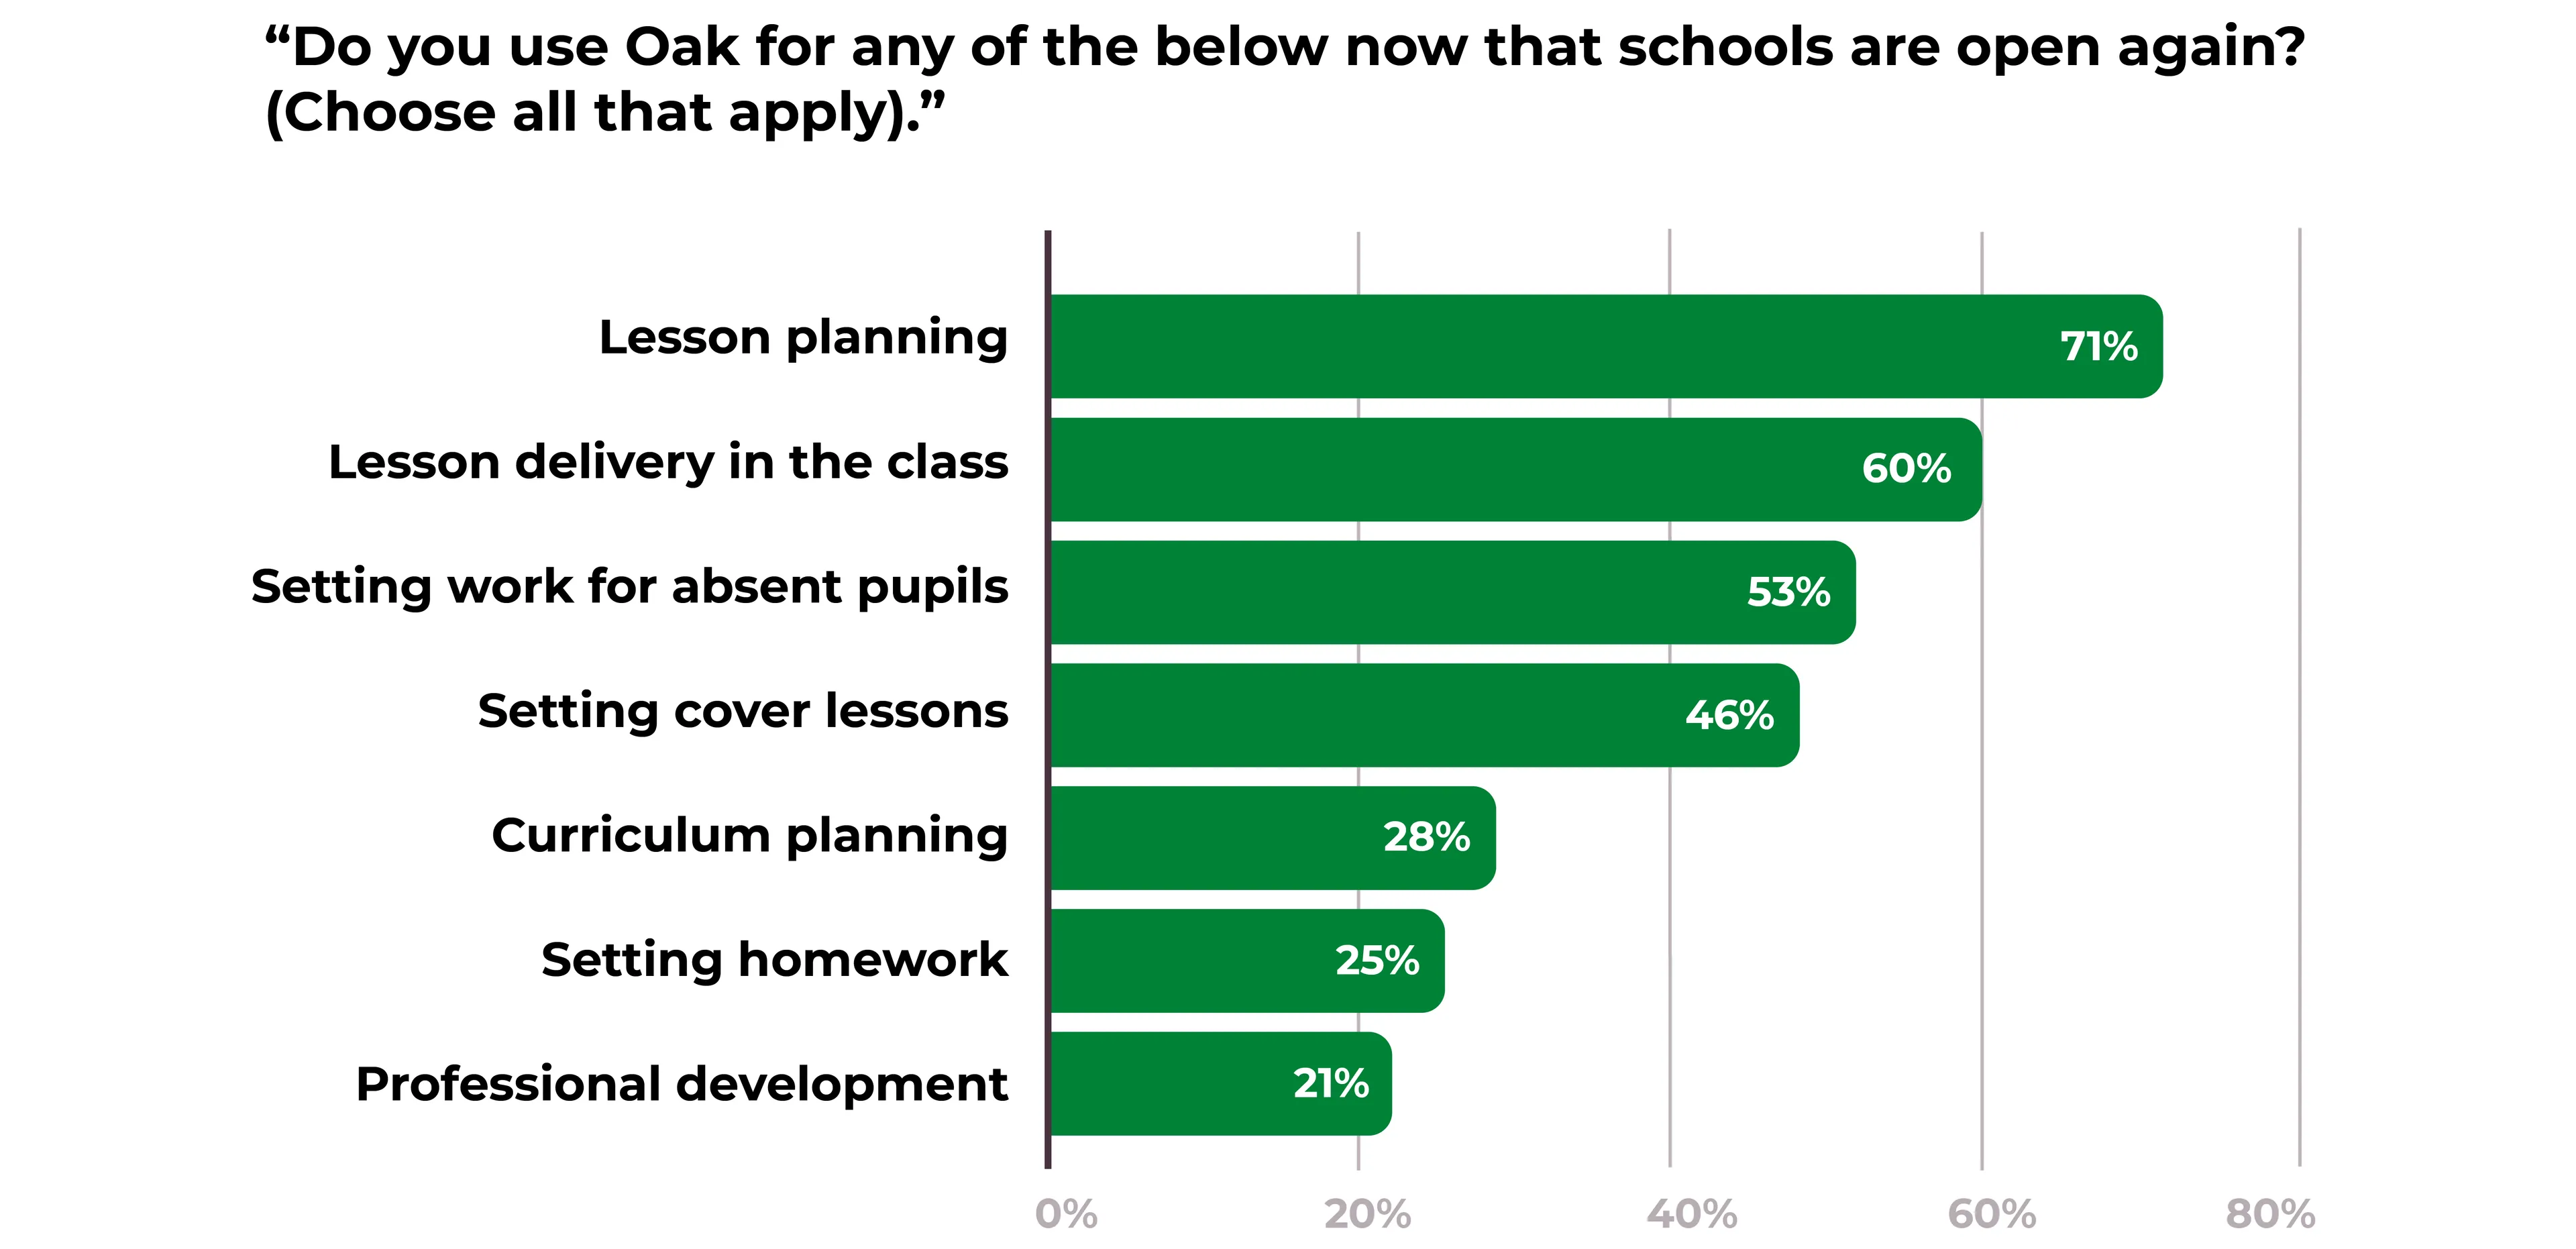 Bar graph showing 71% of respondents use Oak for lesson planning and 60% for lesson delivery in the classroom. 